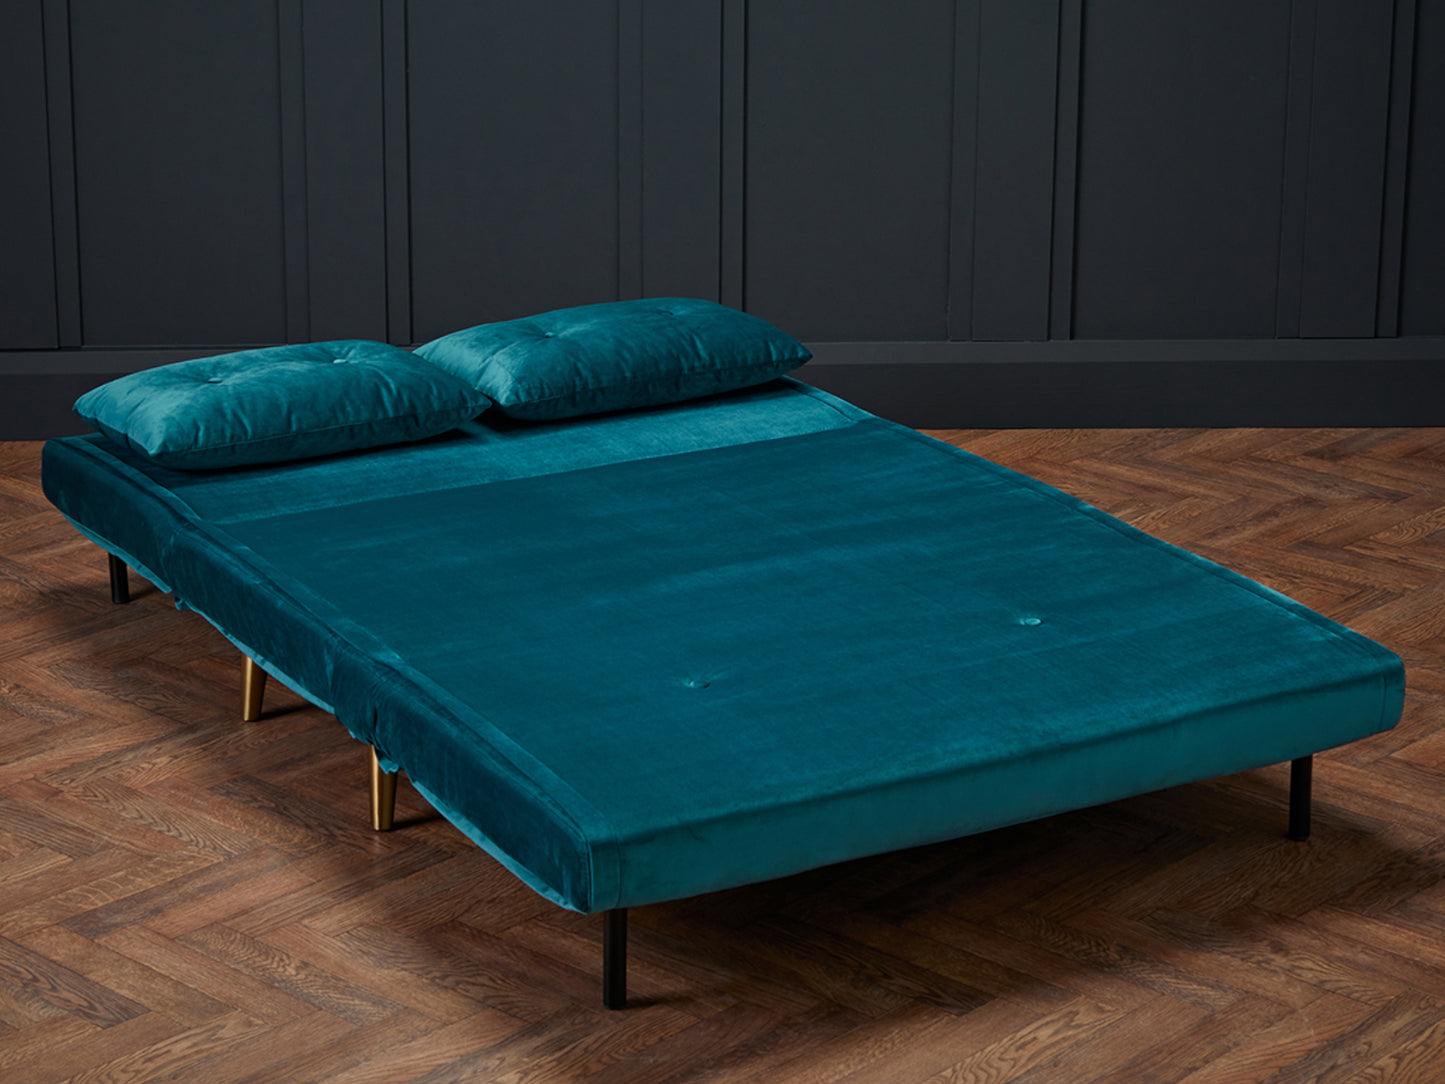 Madison Sofa Bed in Plush Teal